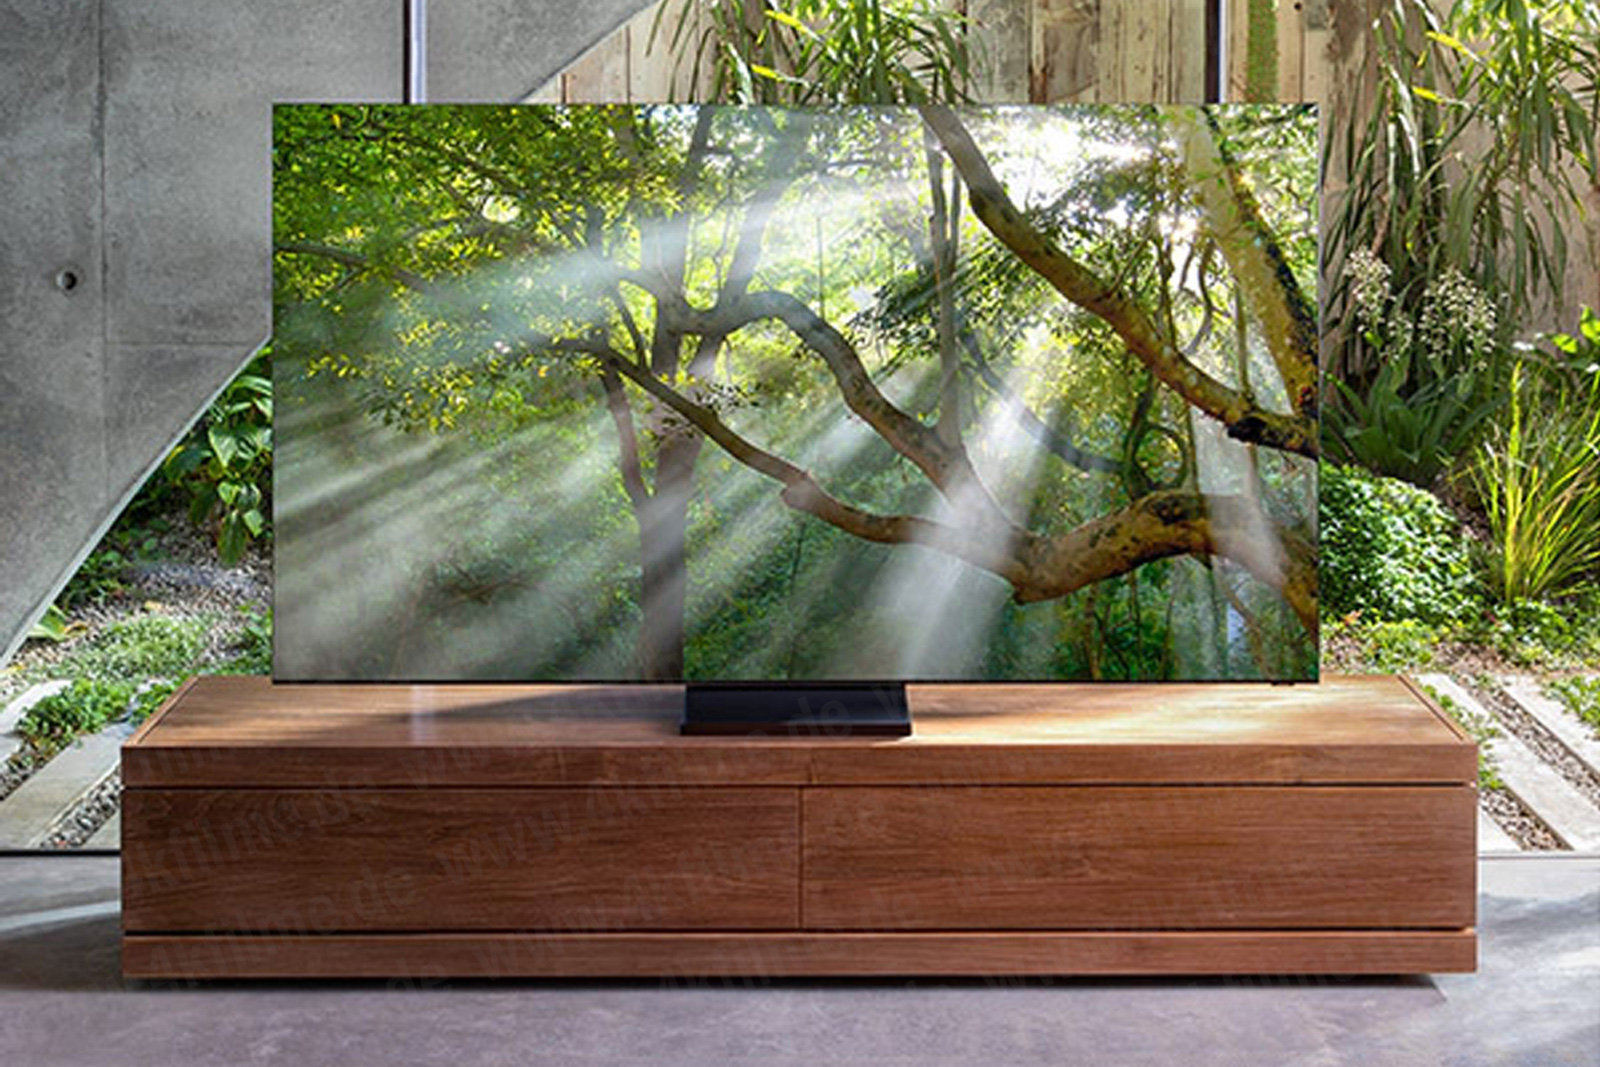 CES 2020: Samsung announces 8K borderless TV and new MicroLED TVs